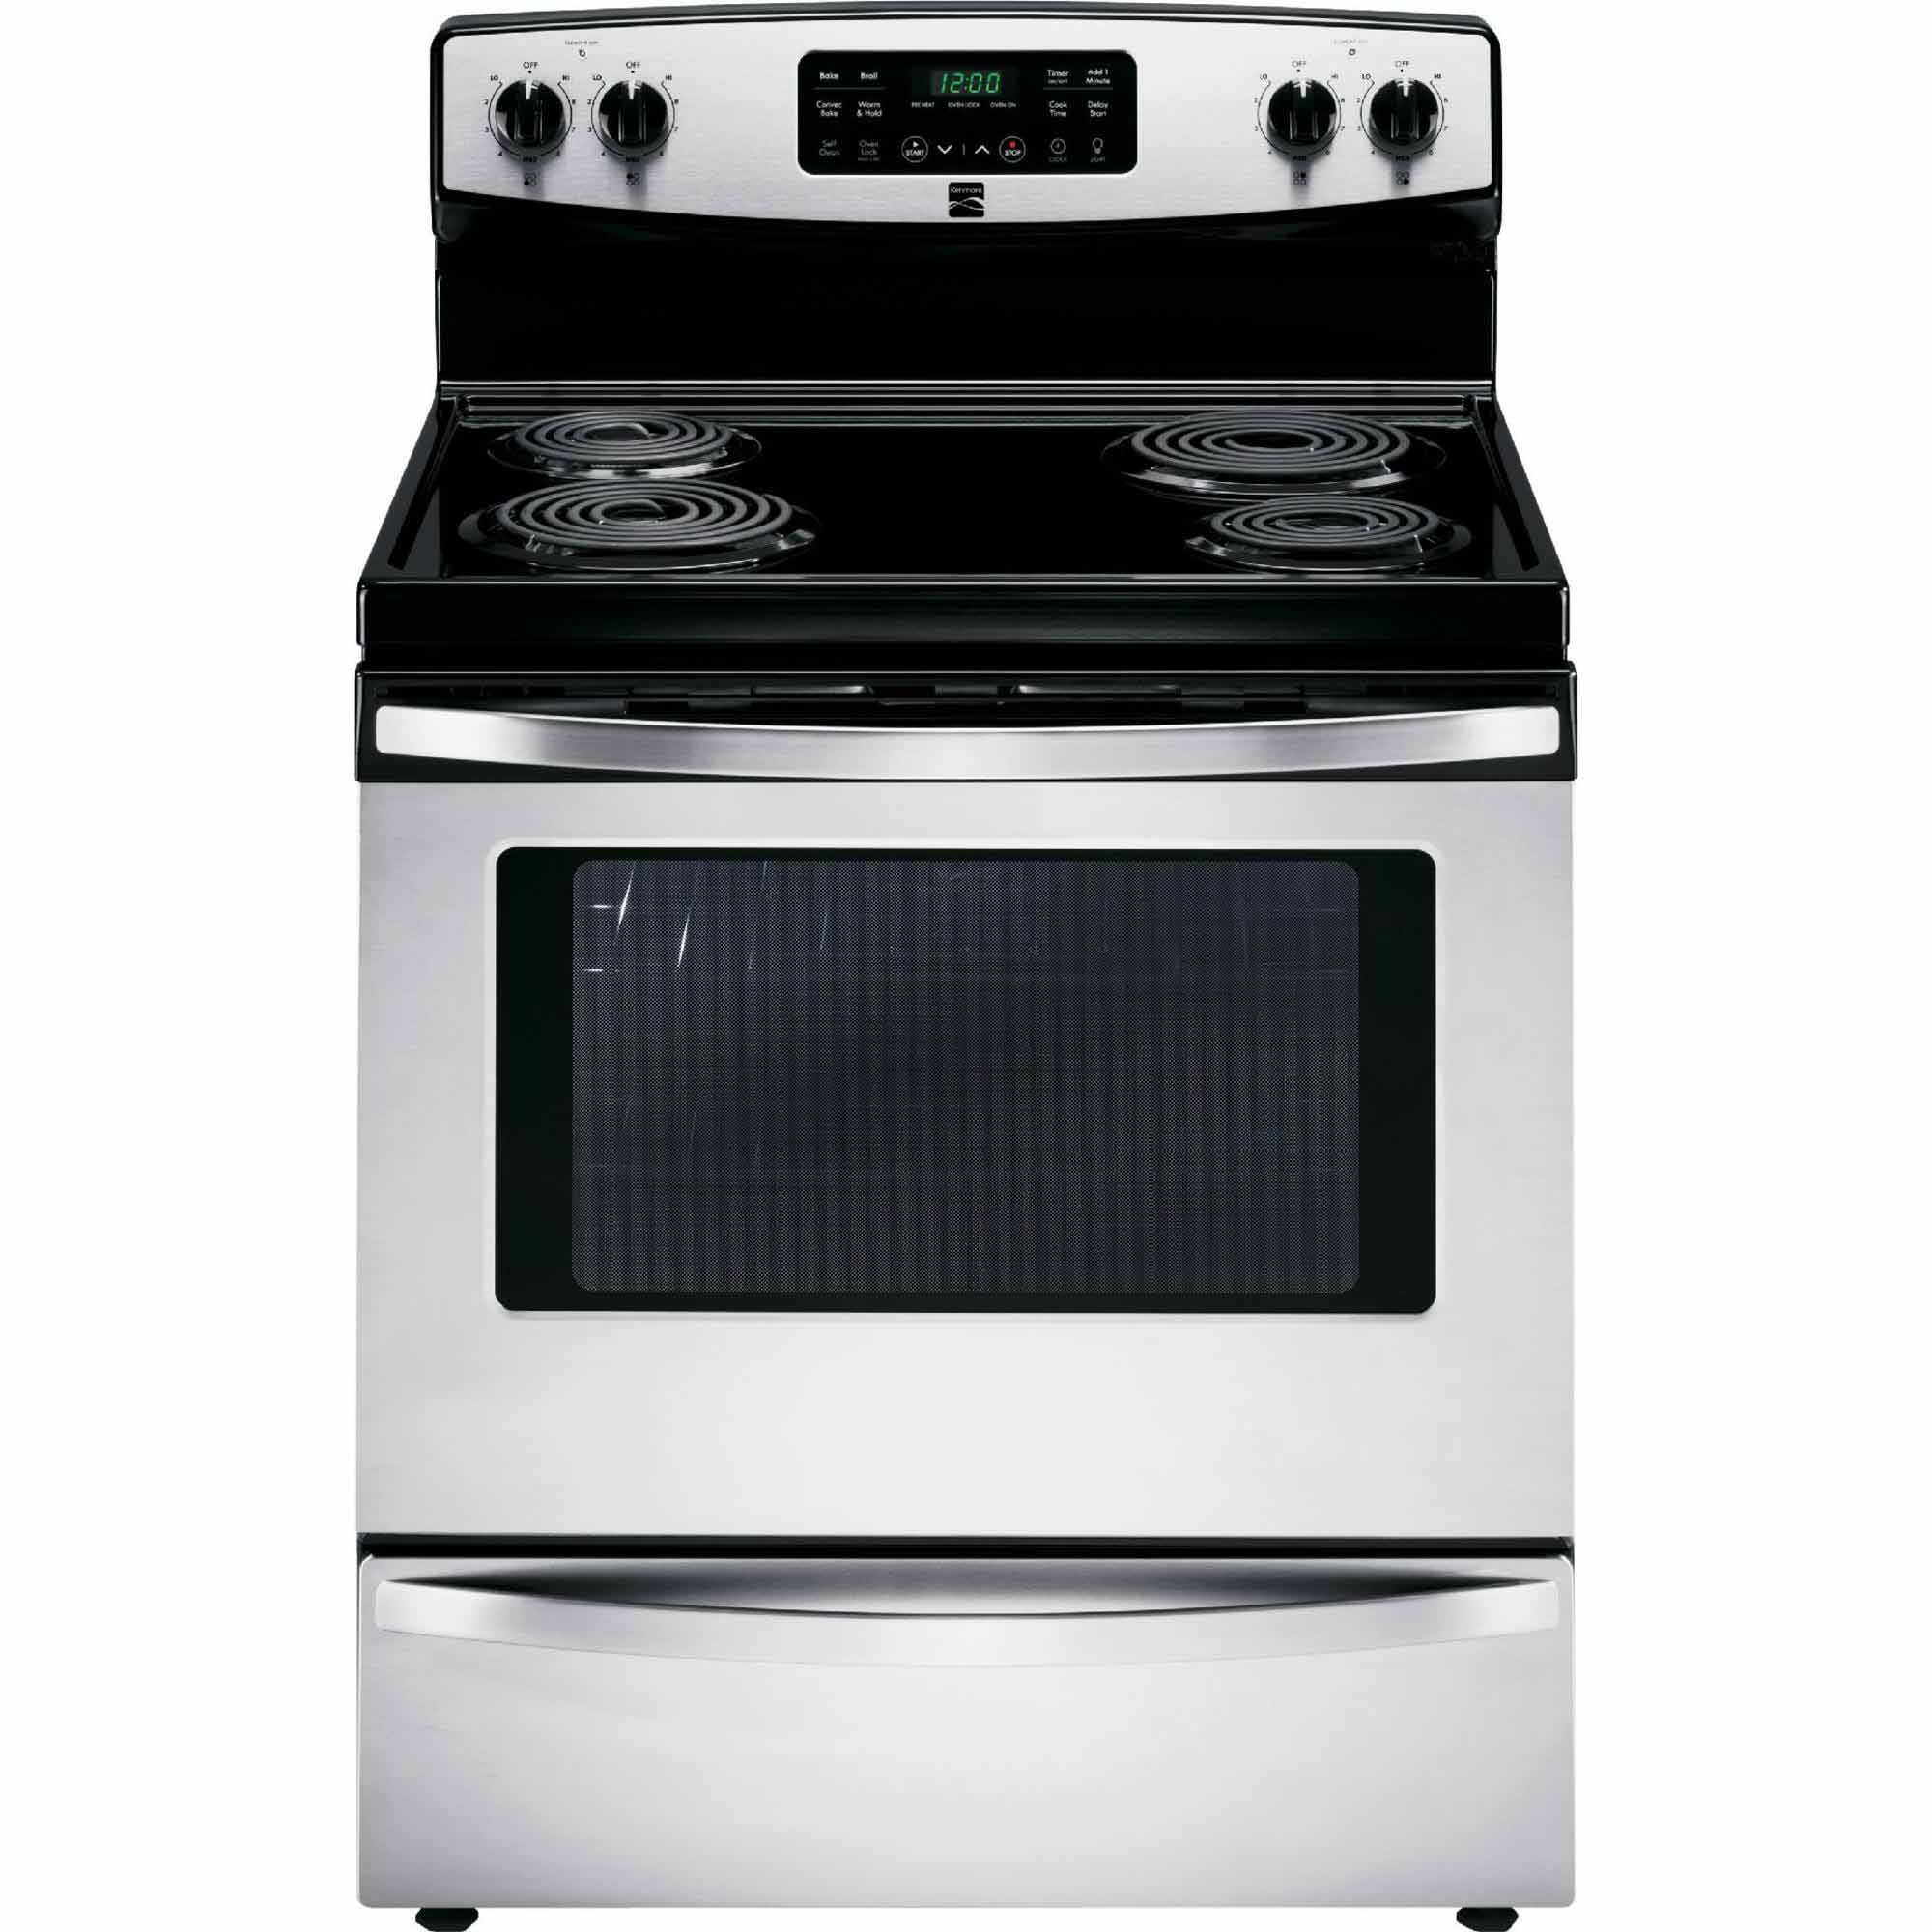 0012505508097 - 94153 5.4 CU. FT. SELF-CLEANING ELECTRIC RANGE W / CONVECTION OVEN - STAINLESS STEEL